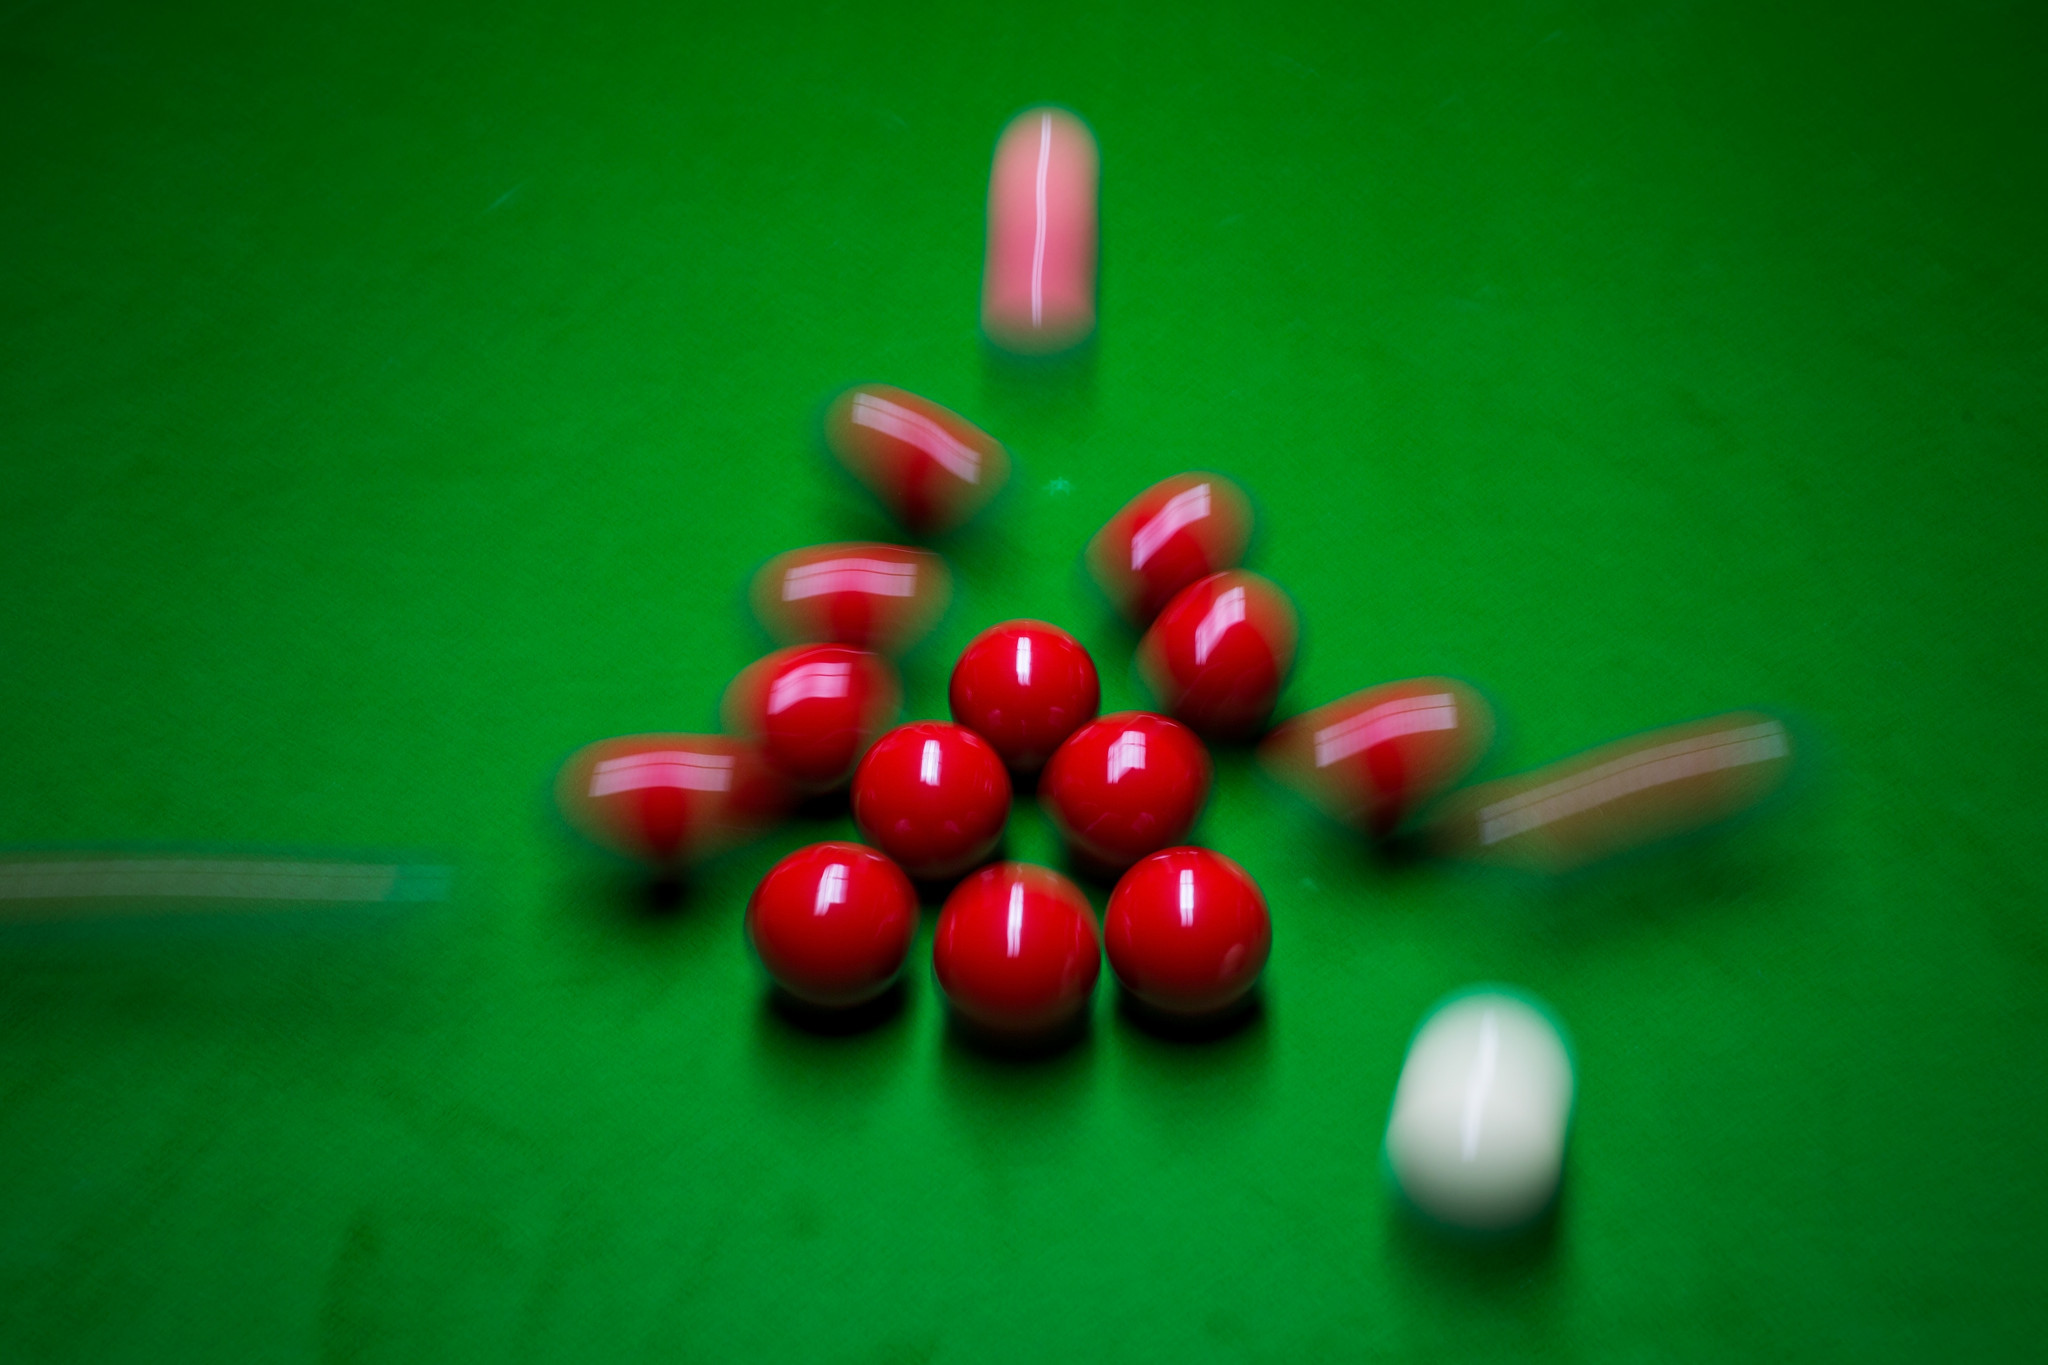 The qualifying rounds for this year's re-scheduled World Snooker Championship will take place next month in Sheffield ©Getty Images